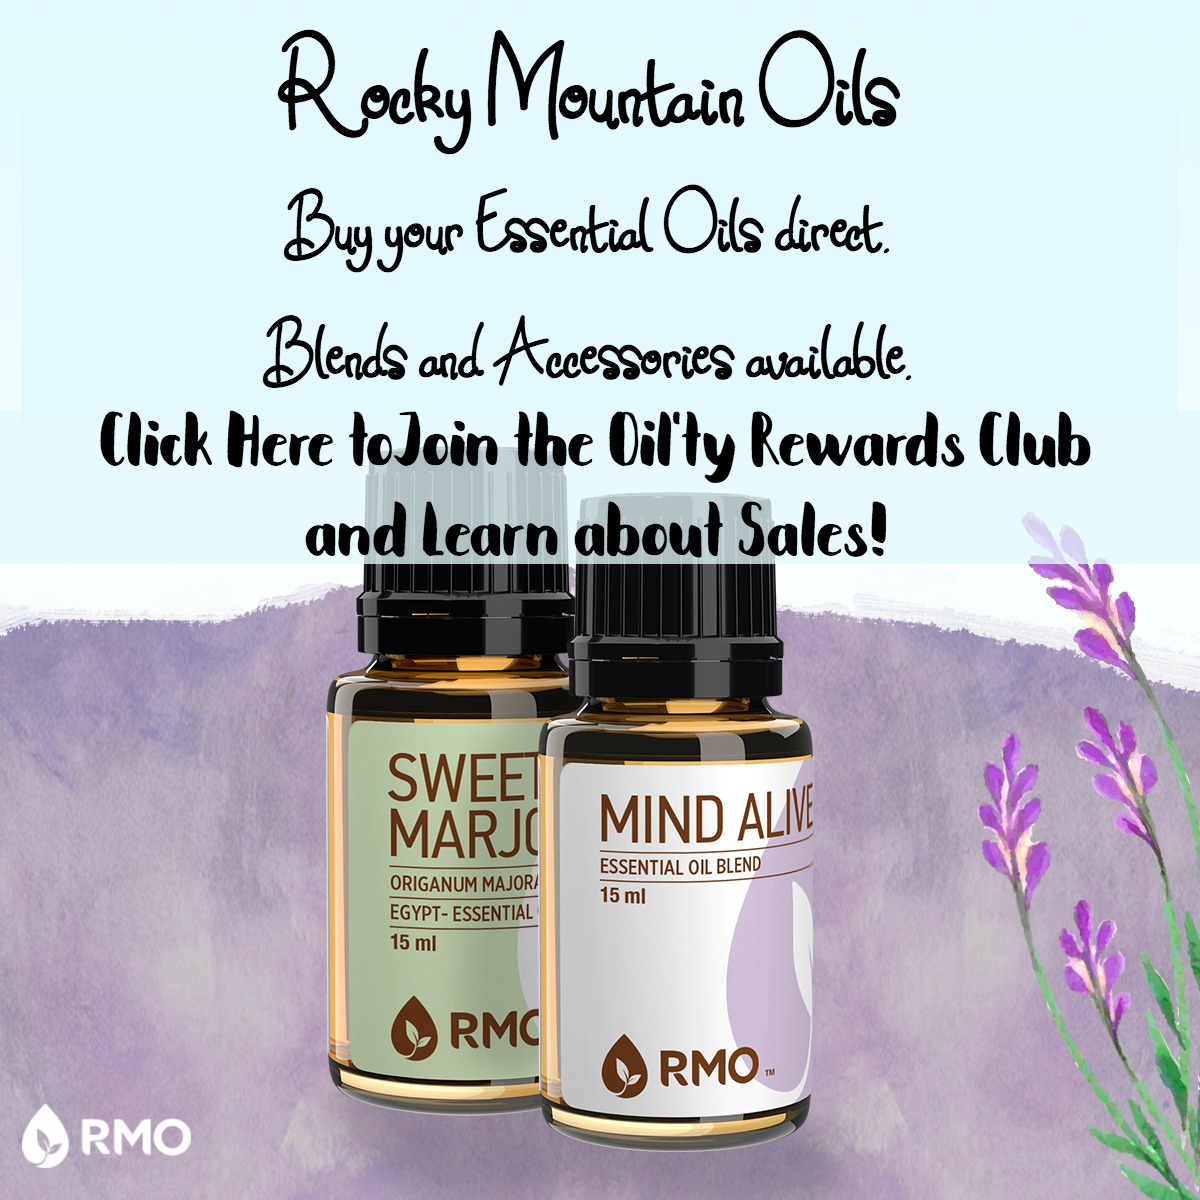 Rocky Mountain Oils ~ Buy your essential oils direct